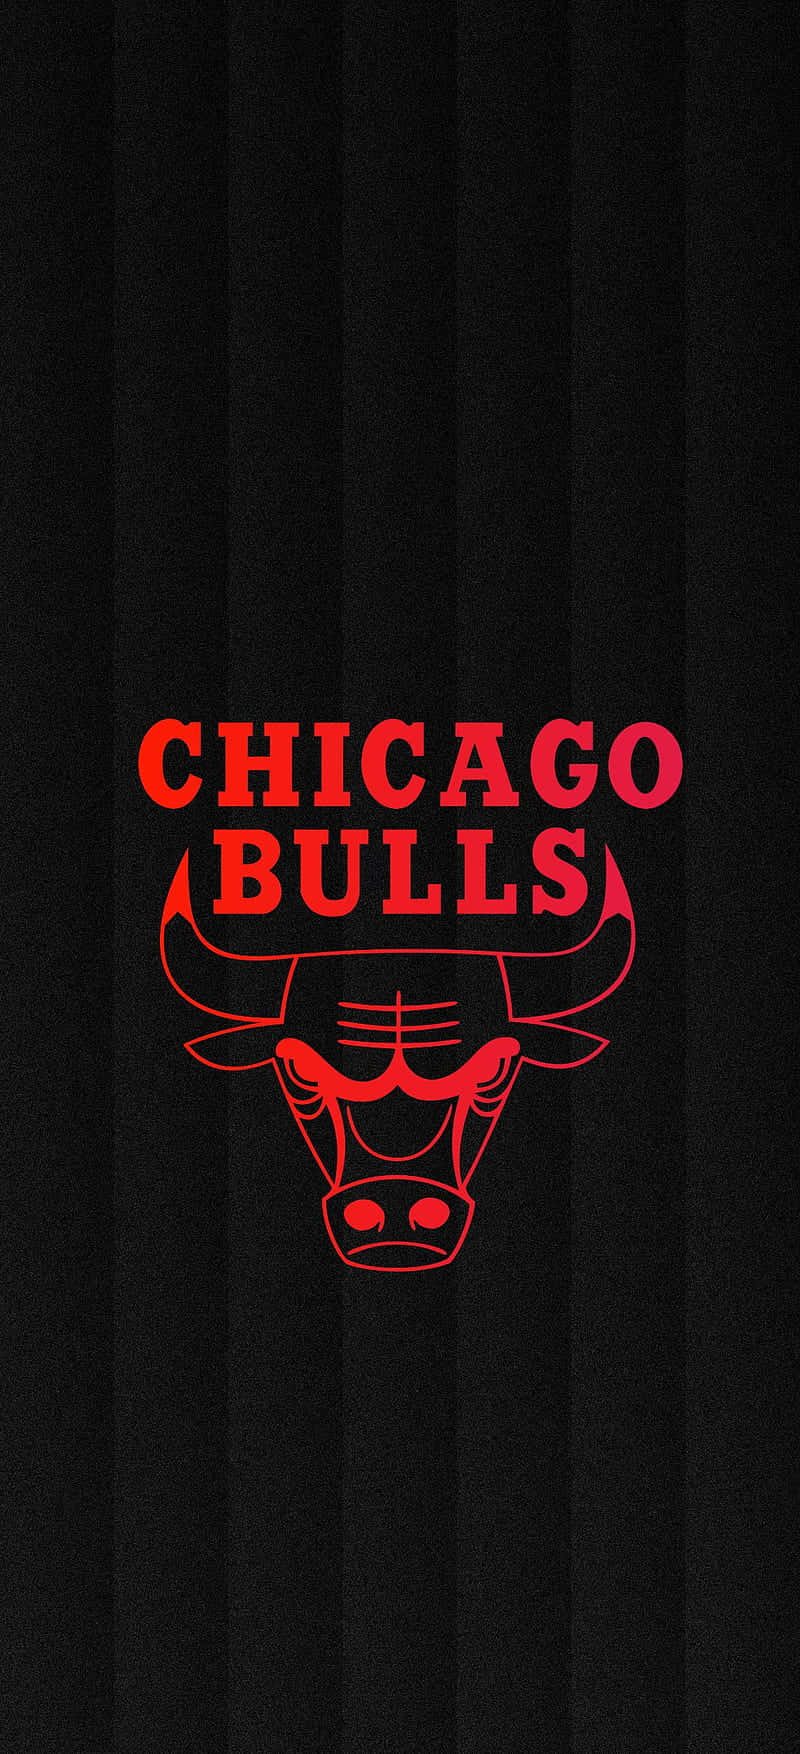 Get Ready To Cheer On The Chicago Bulls With This Glorious Phone Wallpaper!